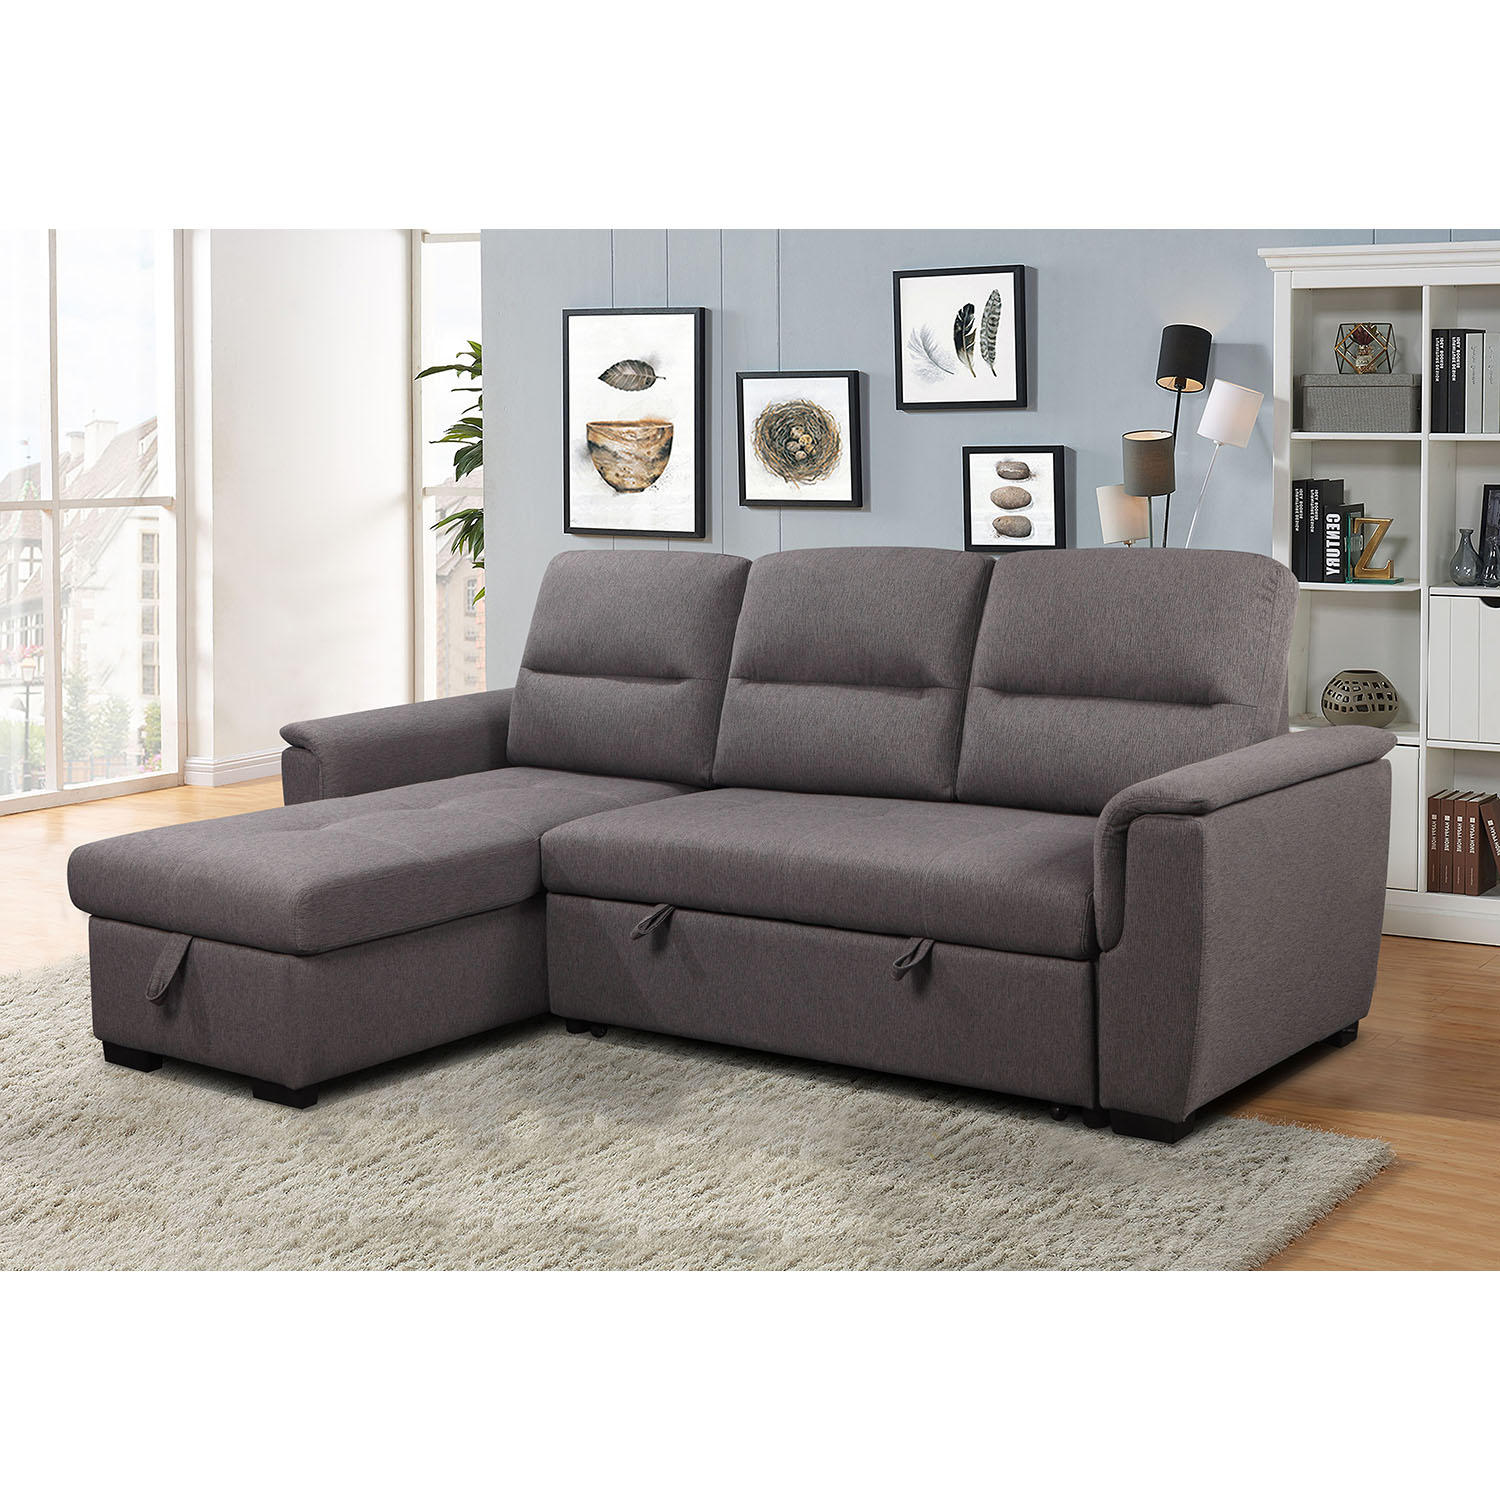 Get Abbyson Living Dakota Reversible Storage Sectional with Pullout Bed